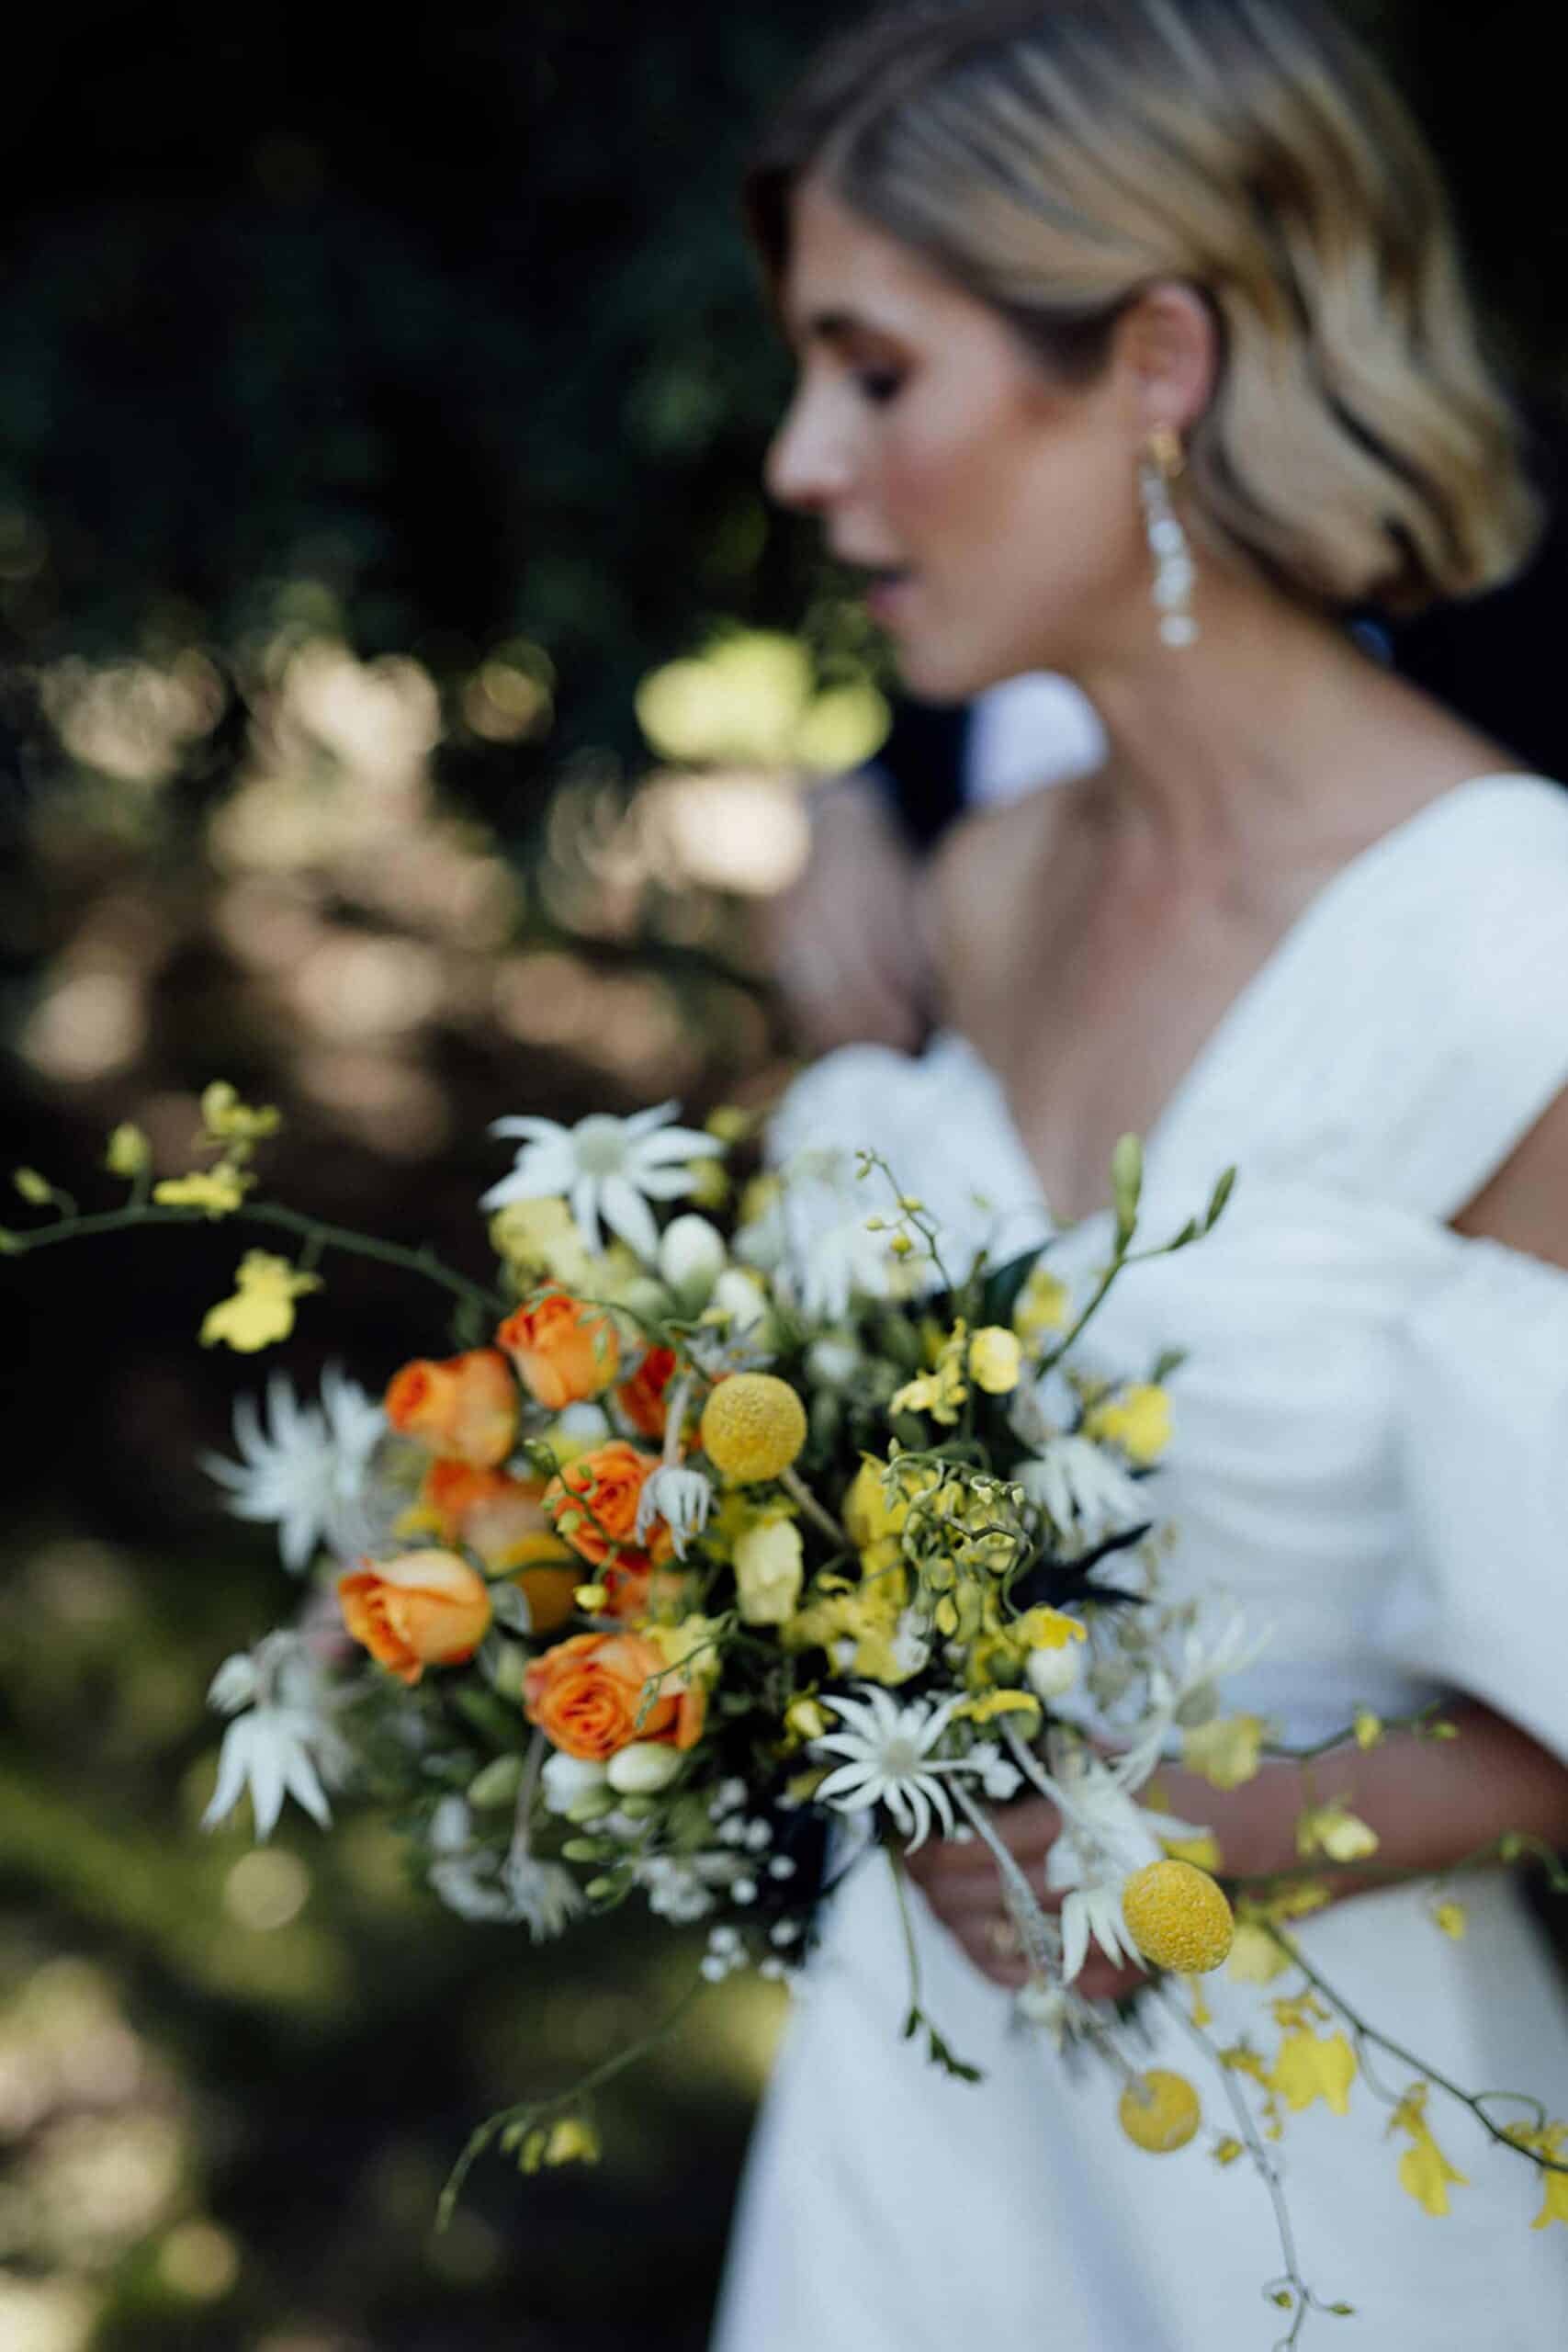 unstructured bridal bouquet with orange roses